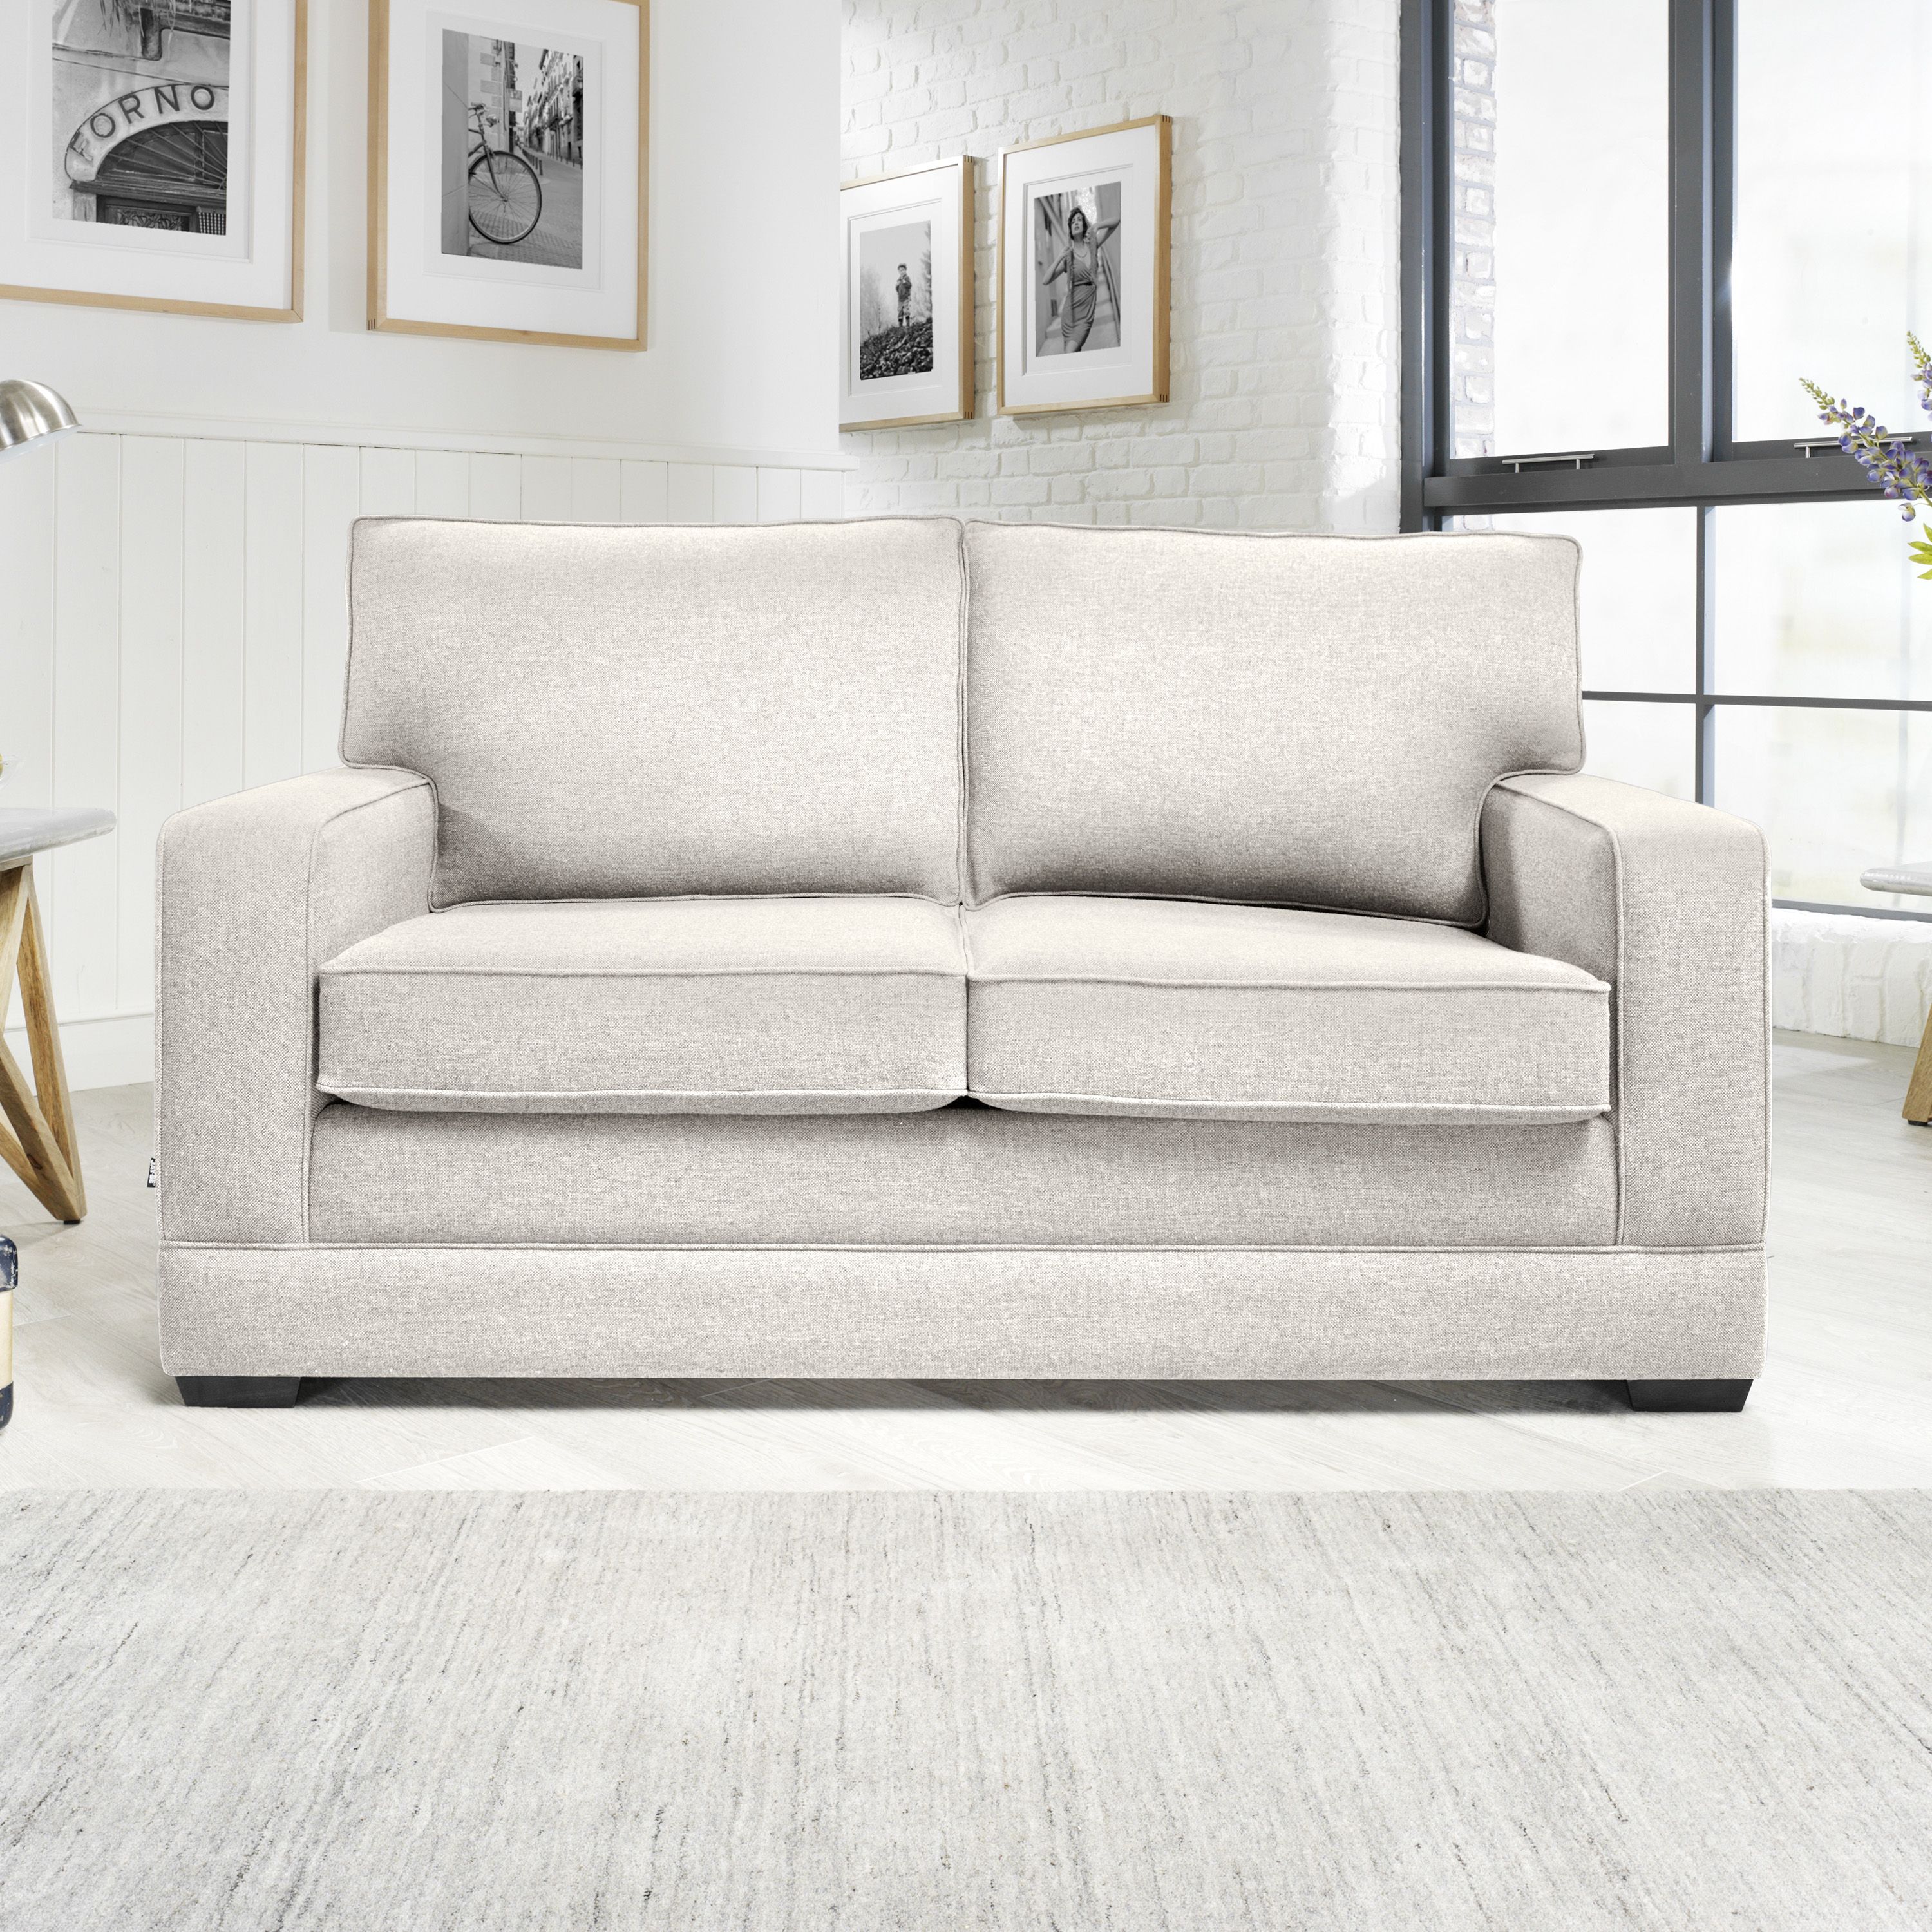 Jay-Be Modern Mink 2 Seater Sofa bed